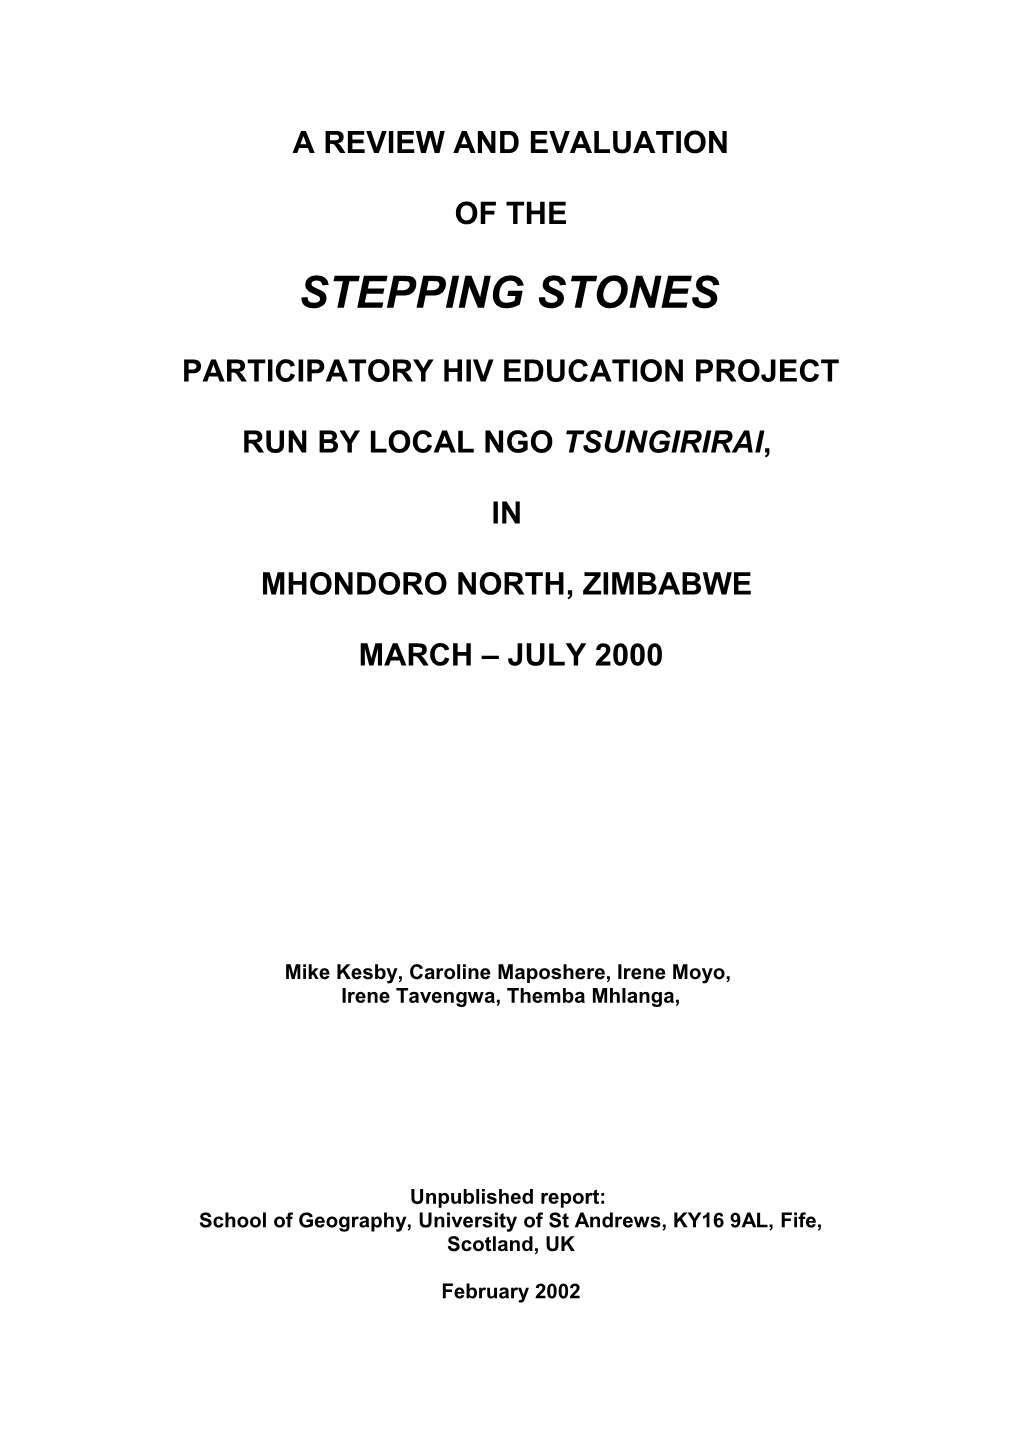 Review and Evaluation of the Steppingstones Participatory HIV Education Project in Zimbabwe